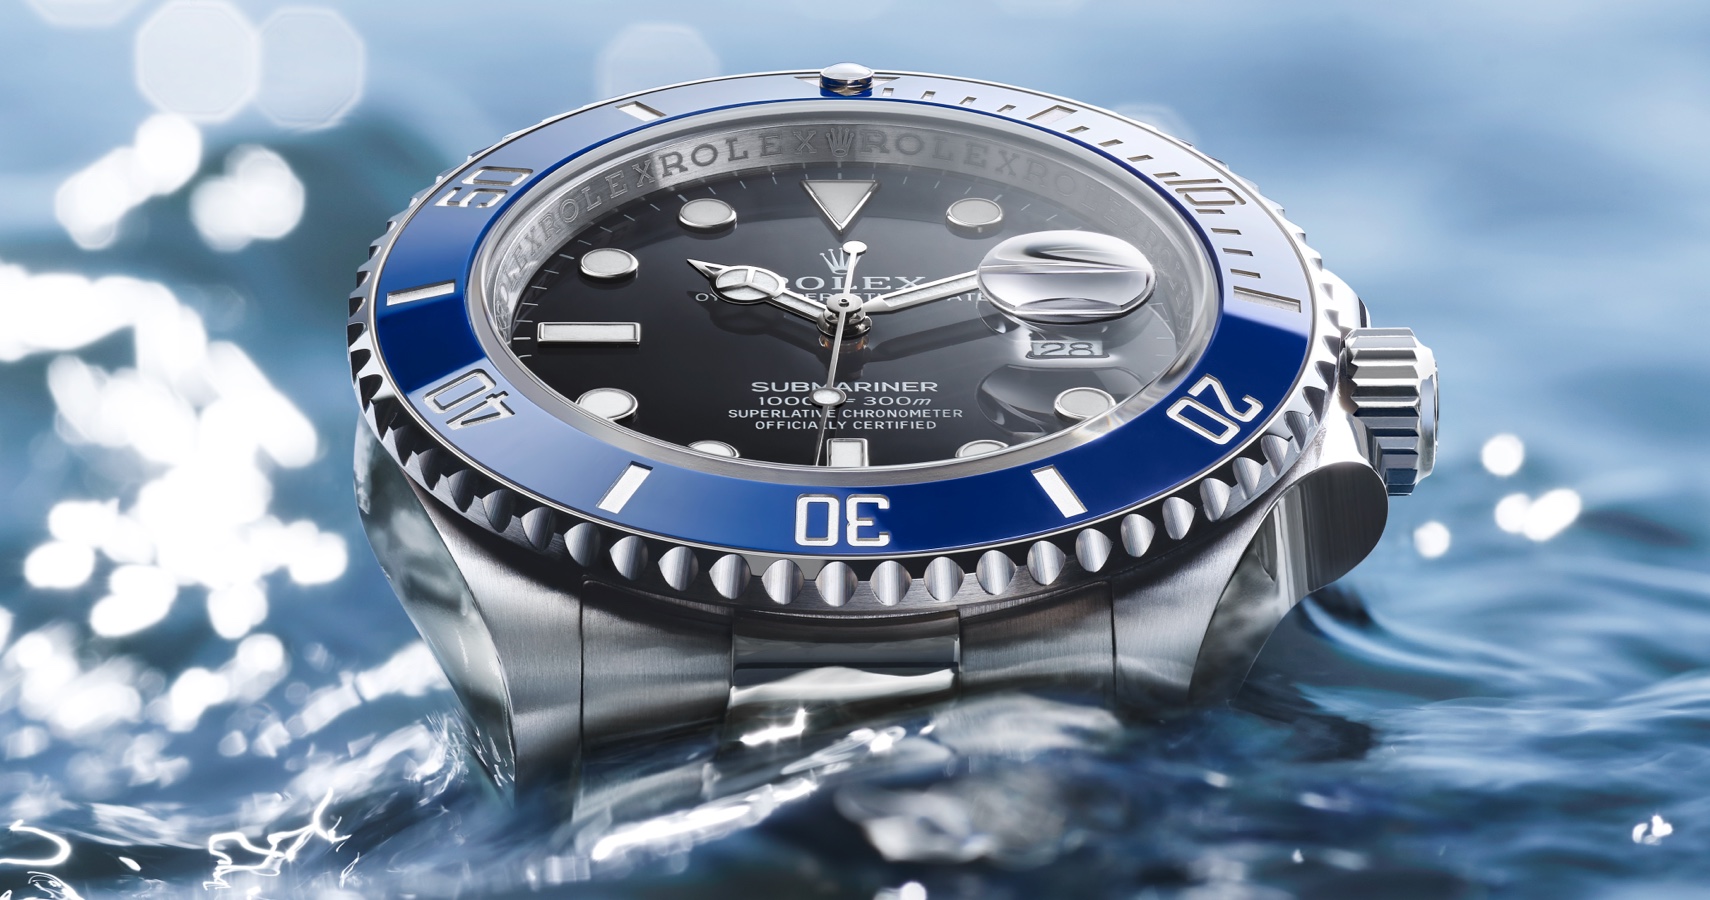 The reference among diver's watches